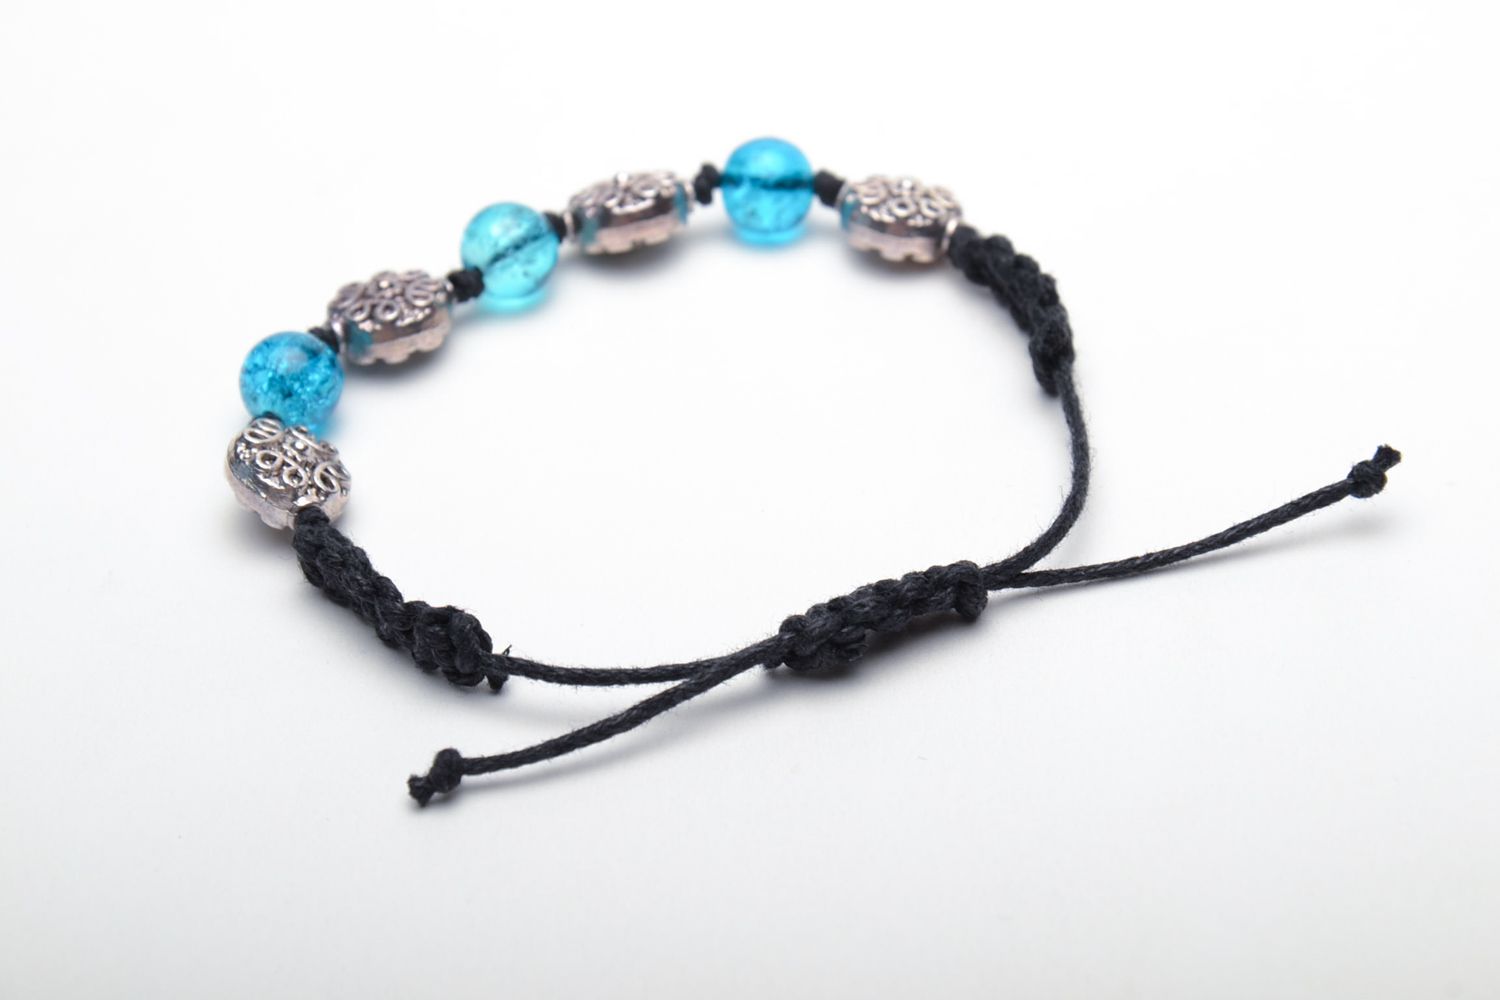 Bracelet with glass beads and metal elements photo 4